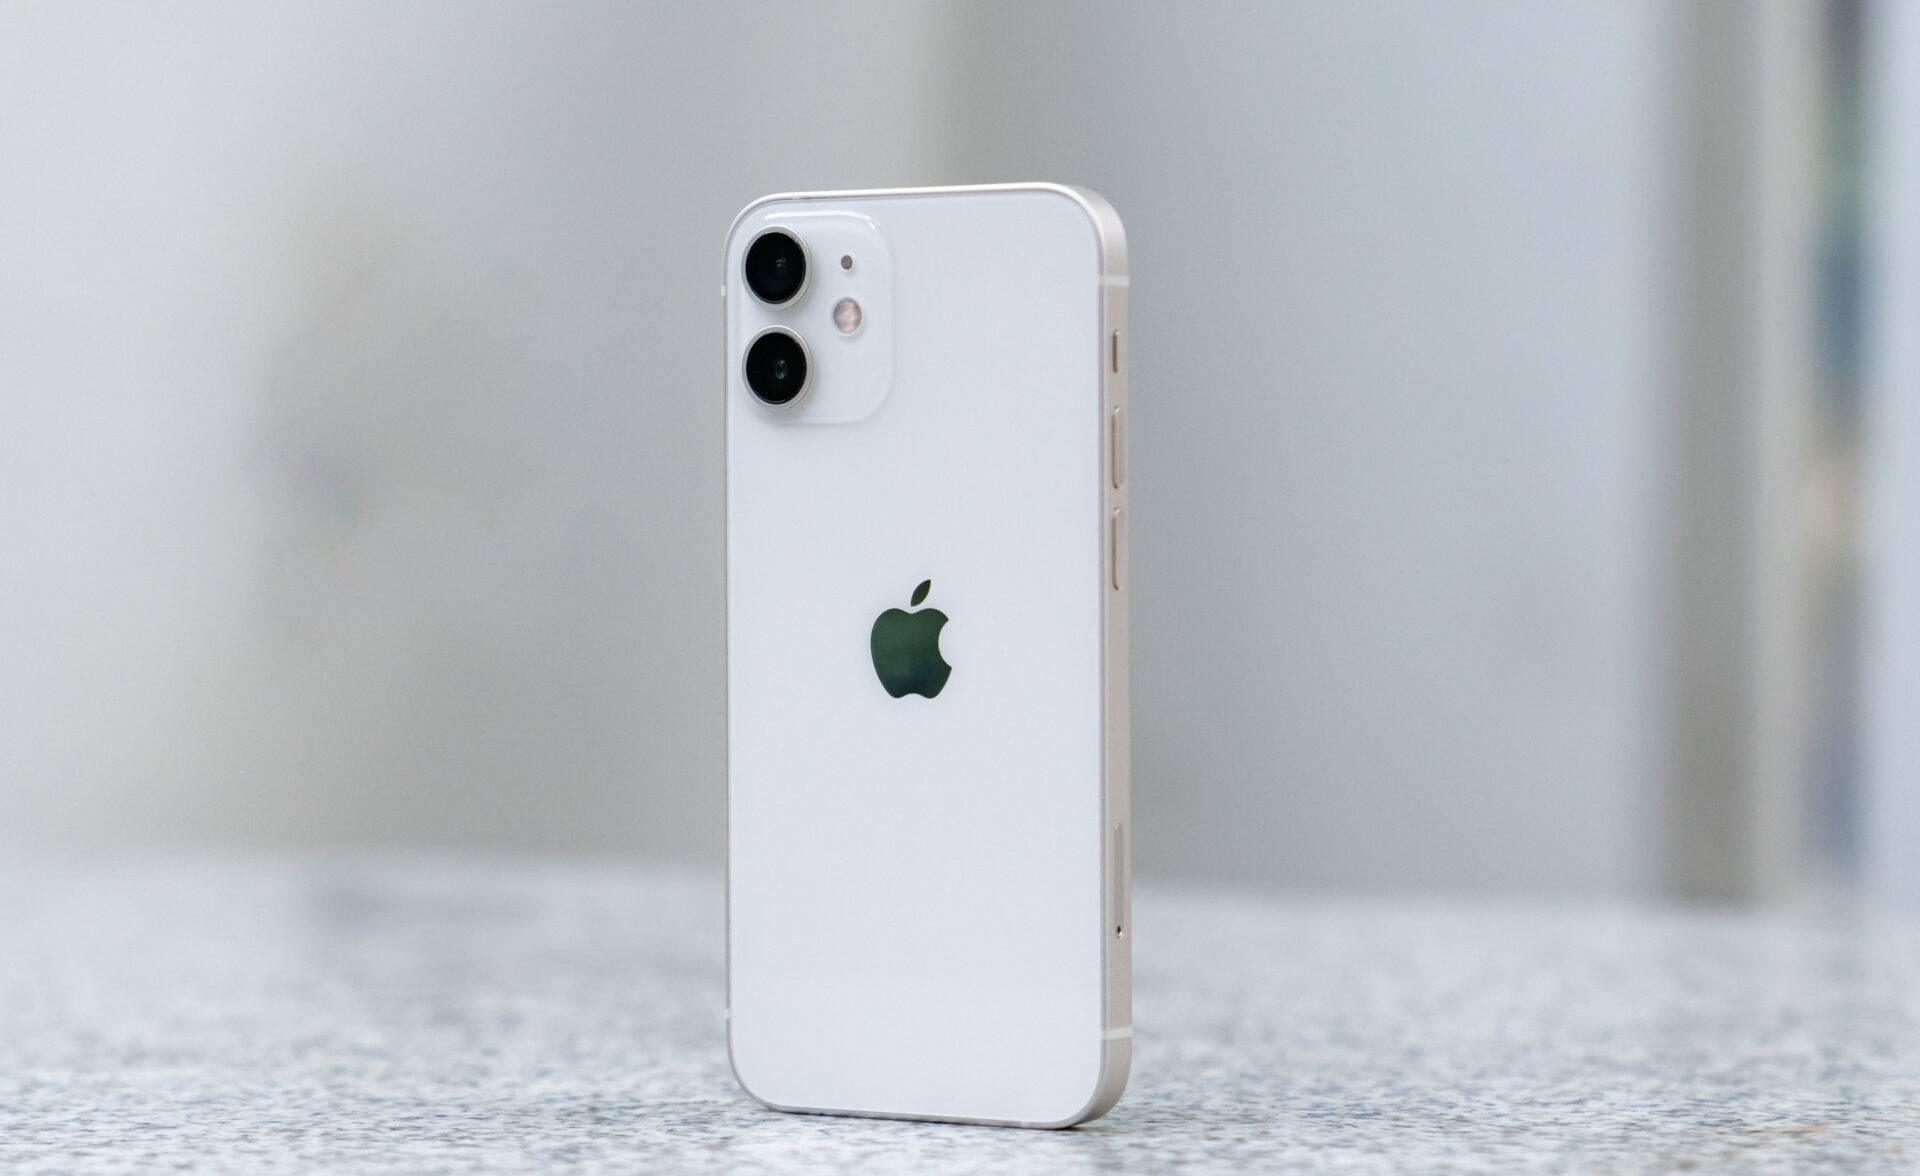 Which iPhone should I get? Best iPhone to buy for photos in 2021